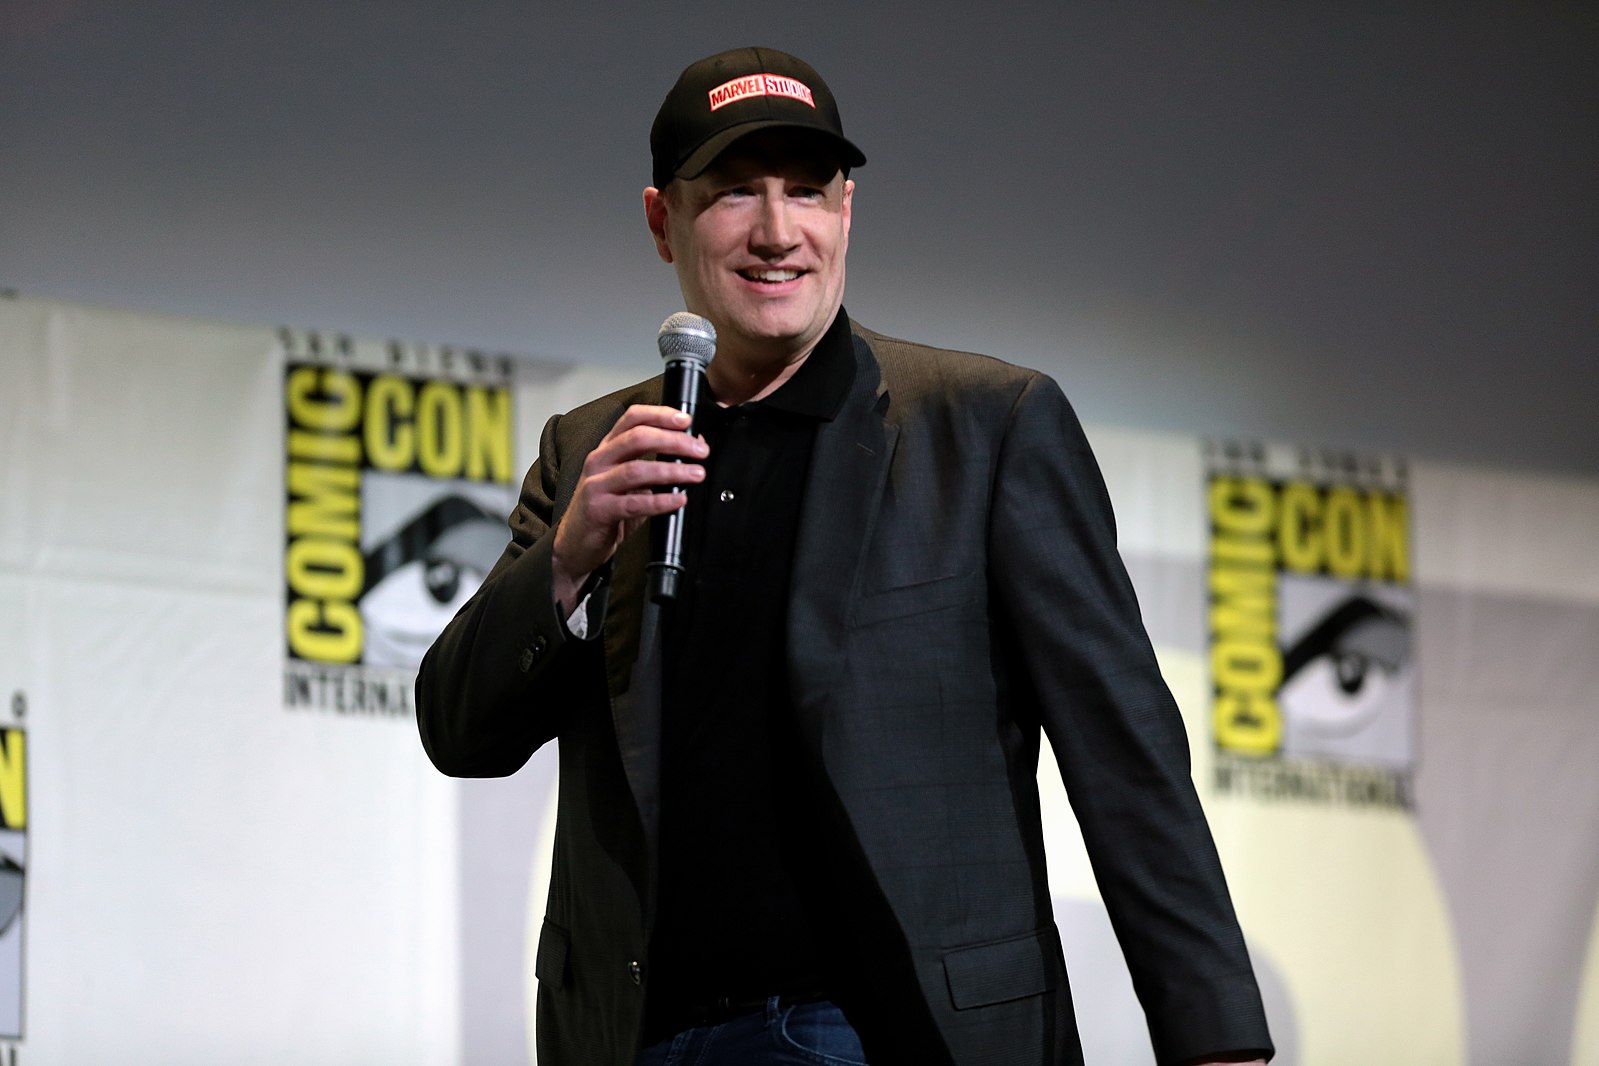 Marvel Studios president Kevin Feige at 2016 San Diego Comic Con